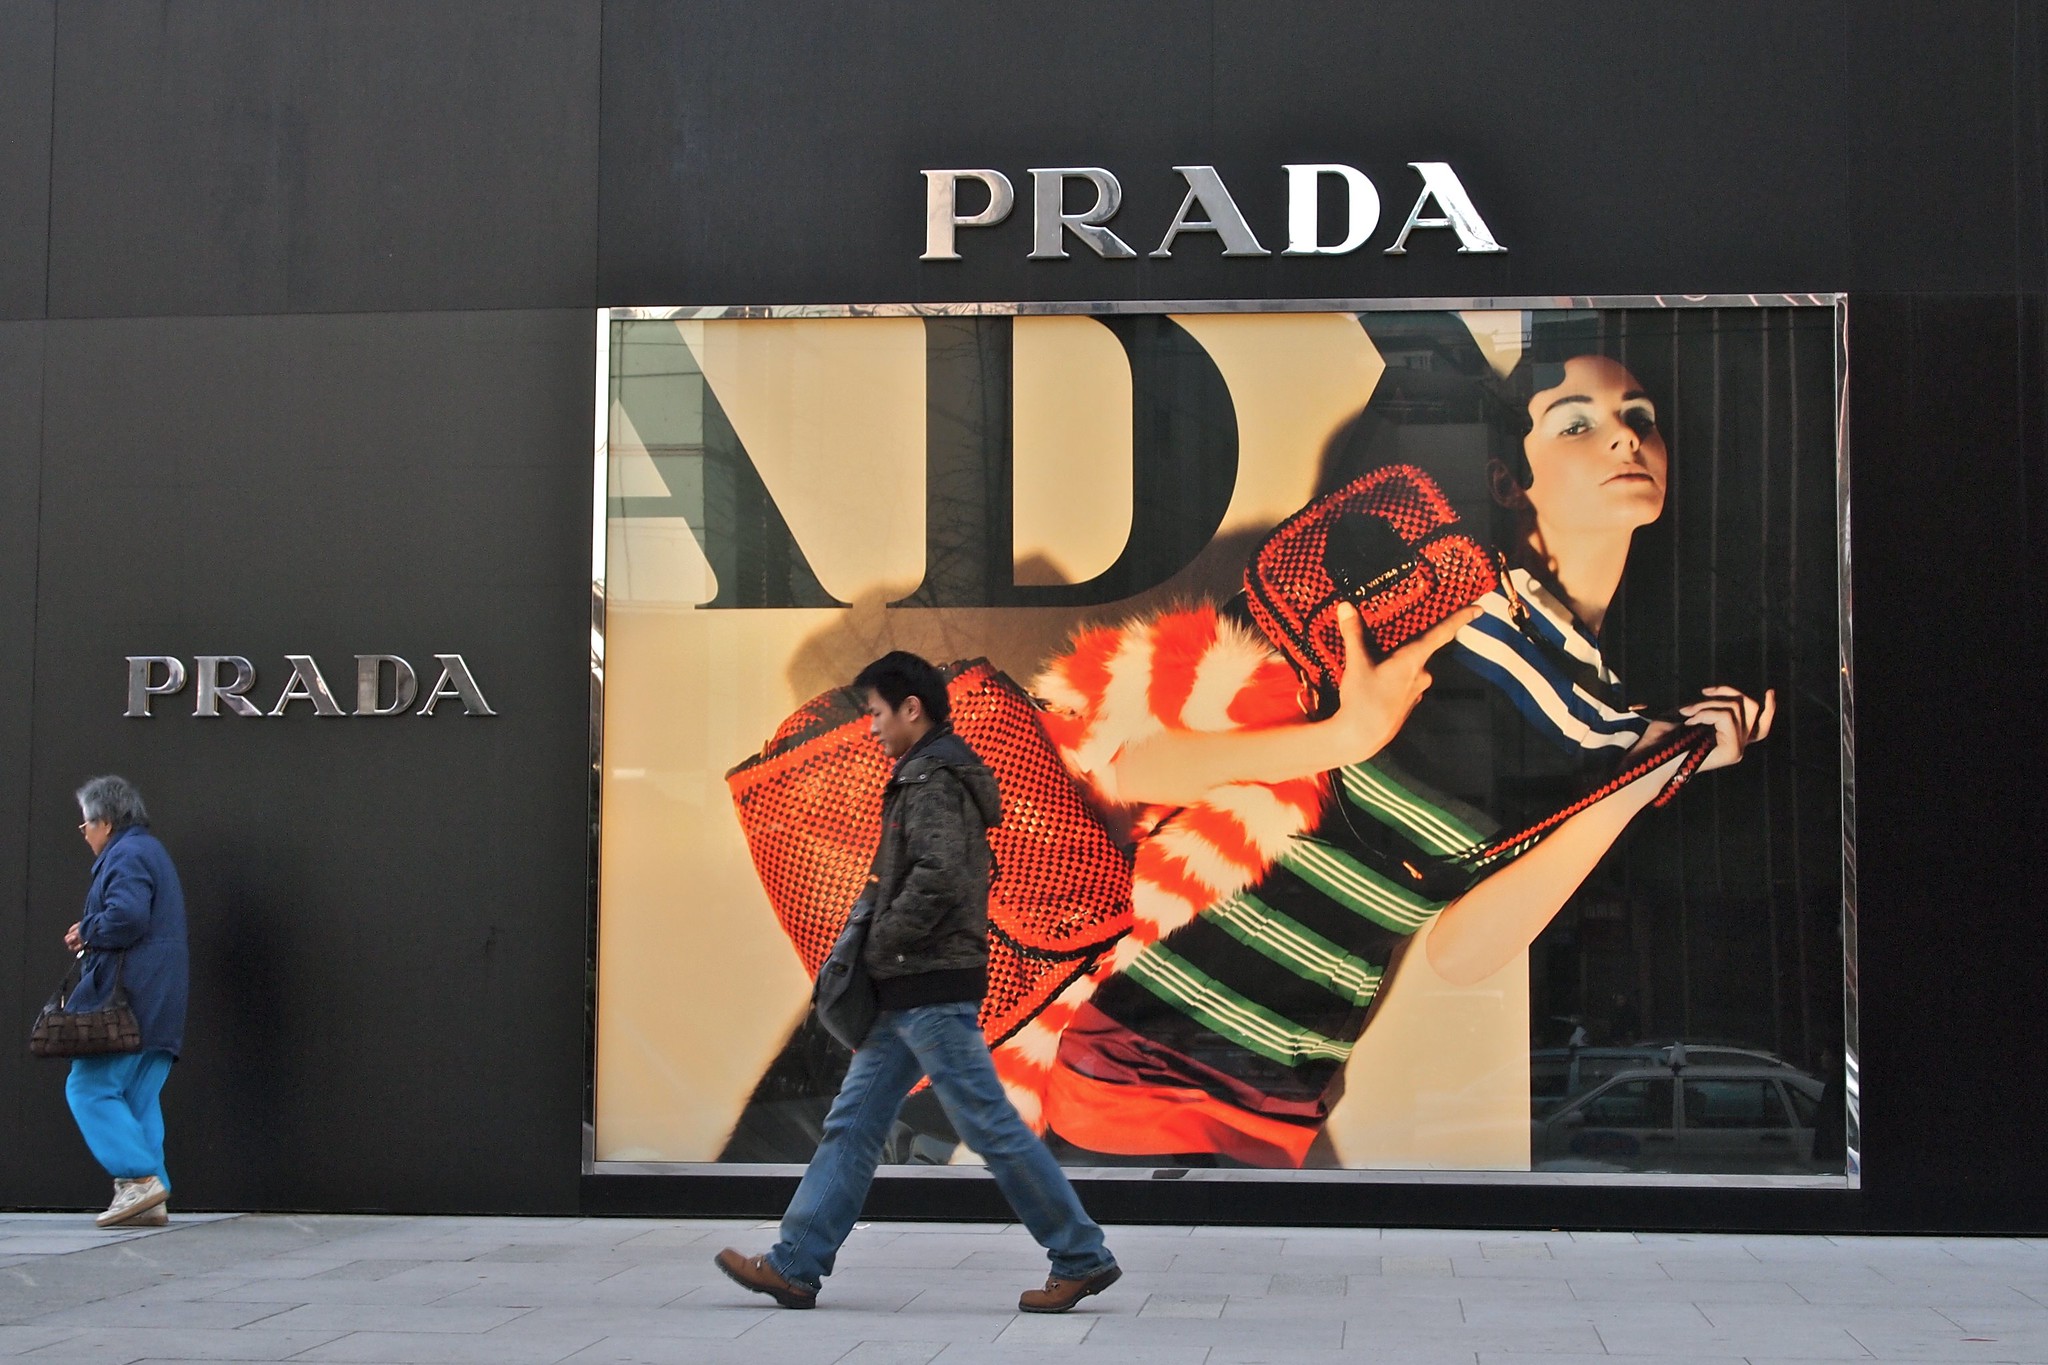 I don't want to be useful, I want to be Prada useful - Daily Trojan